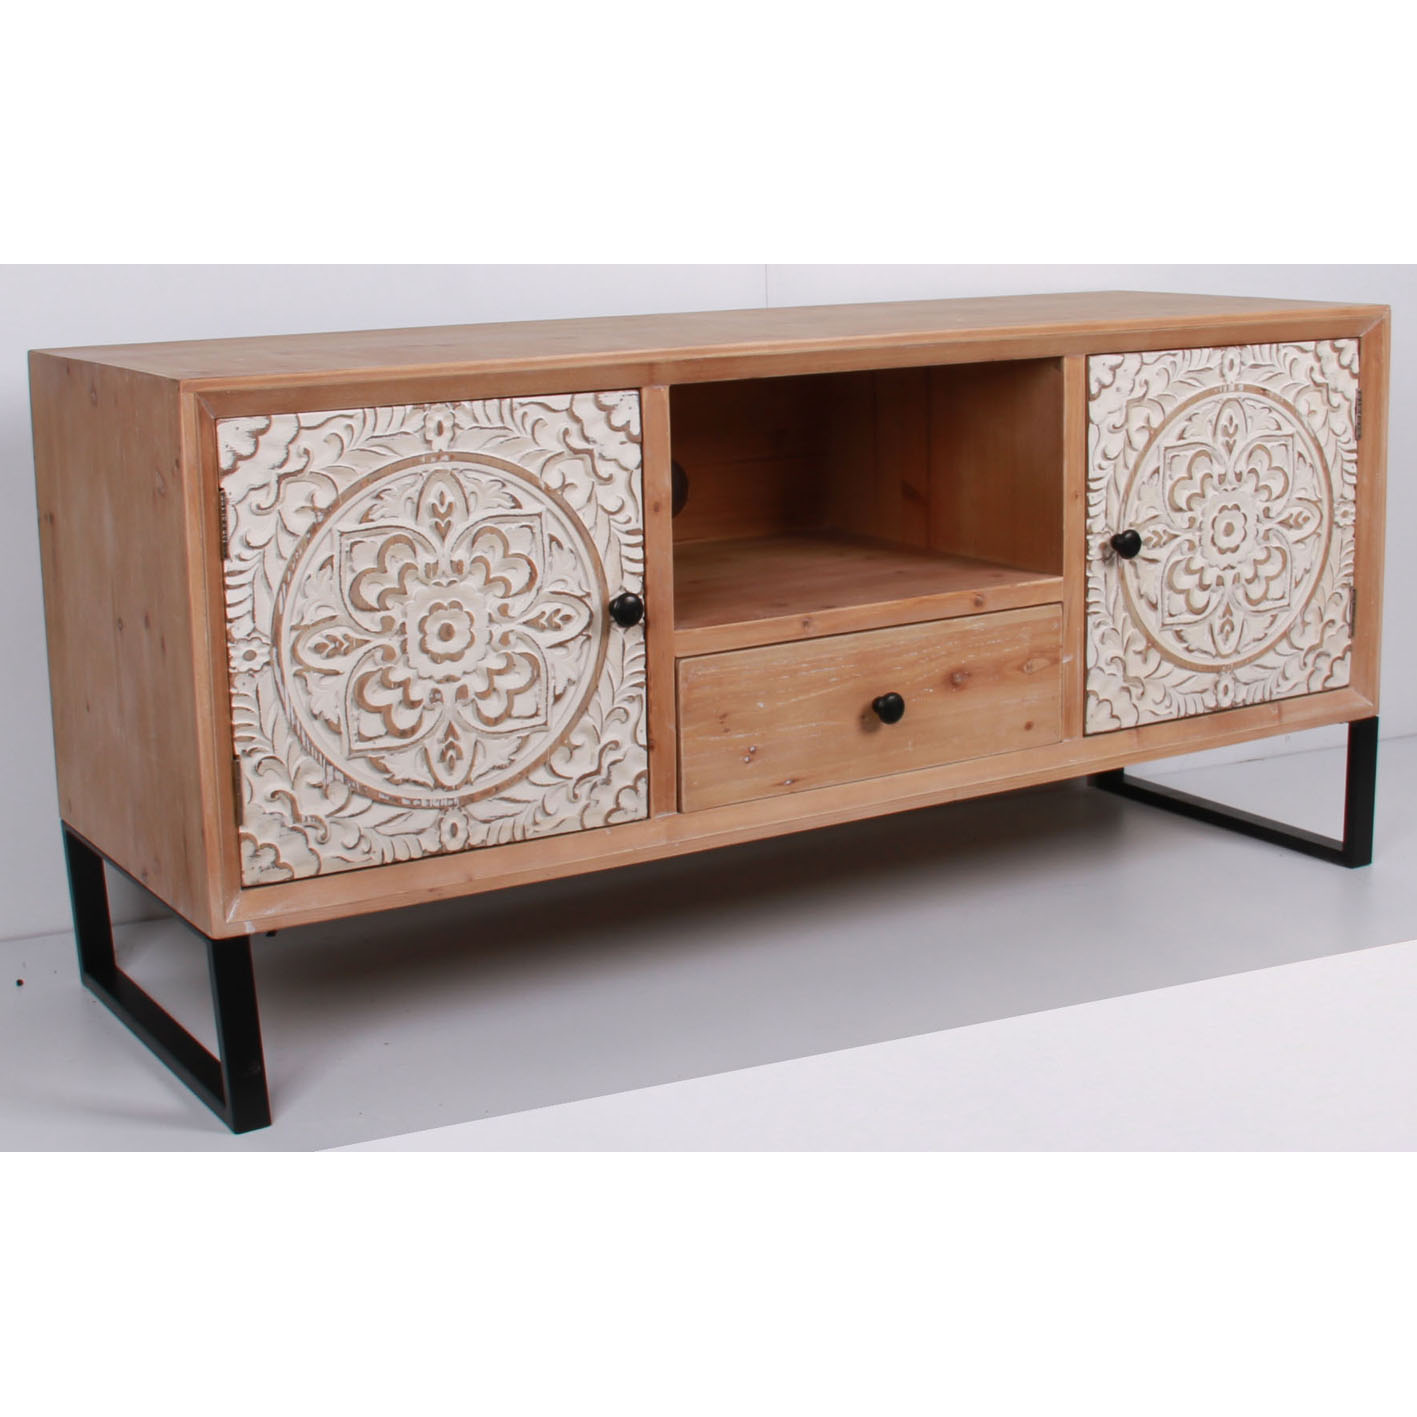 Wood TV stand with  carving doors and metal legs